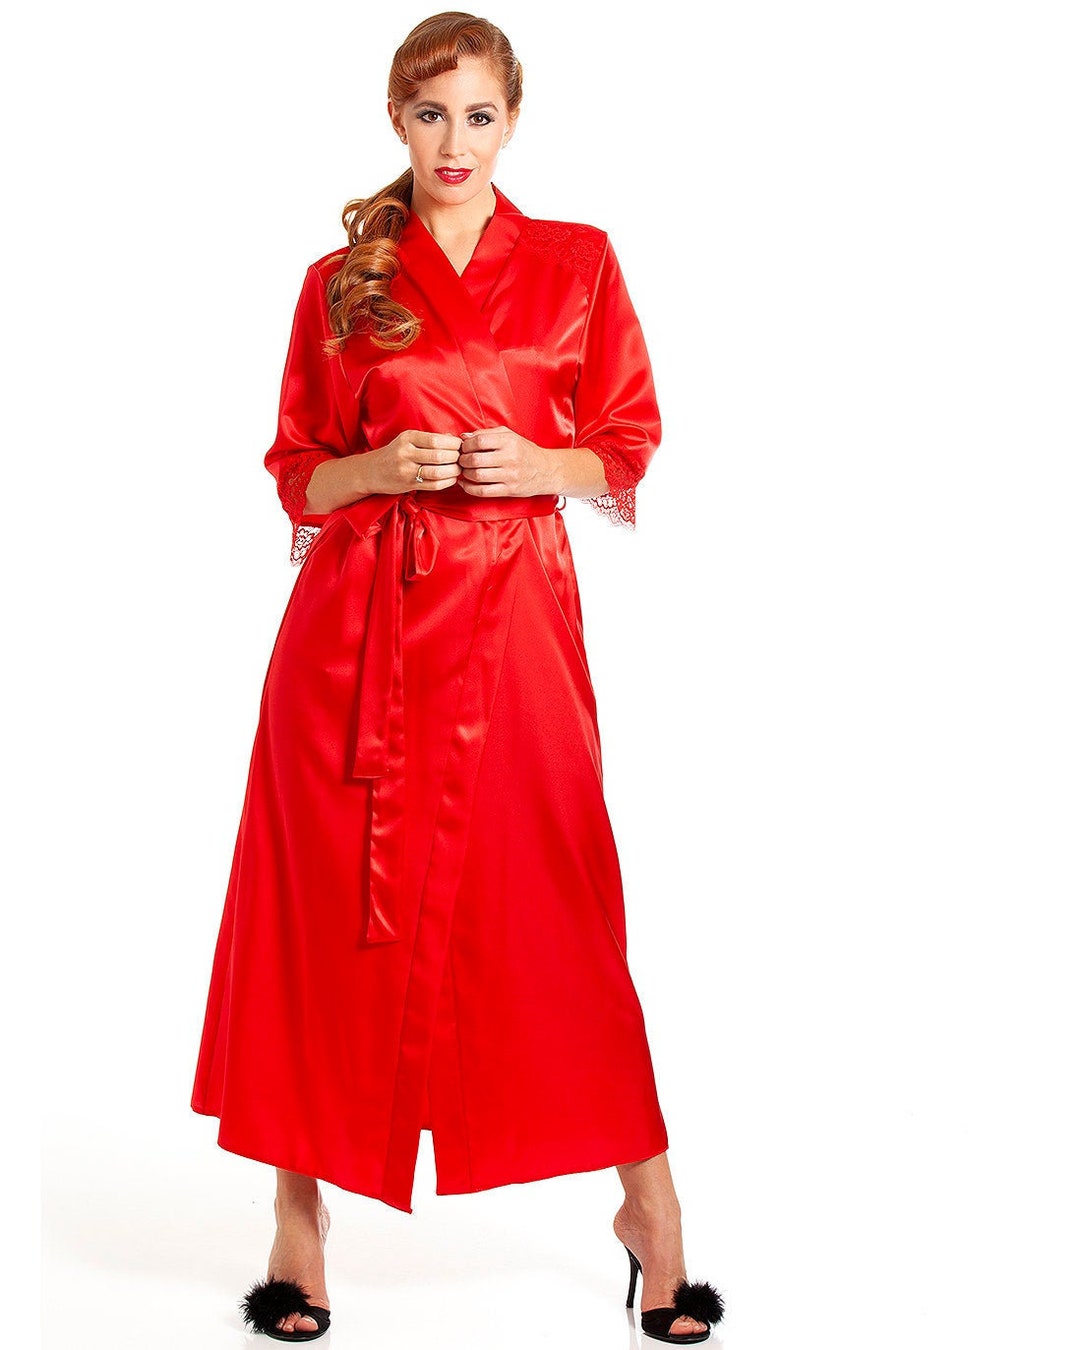 Jane Lace Trim Long Satin Robe Candy Apple Red - Etsy